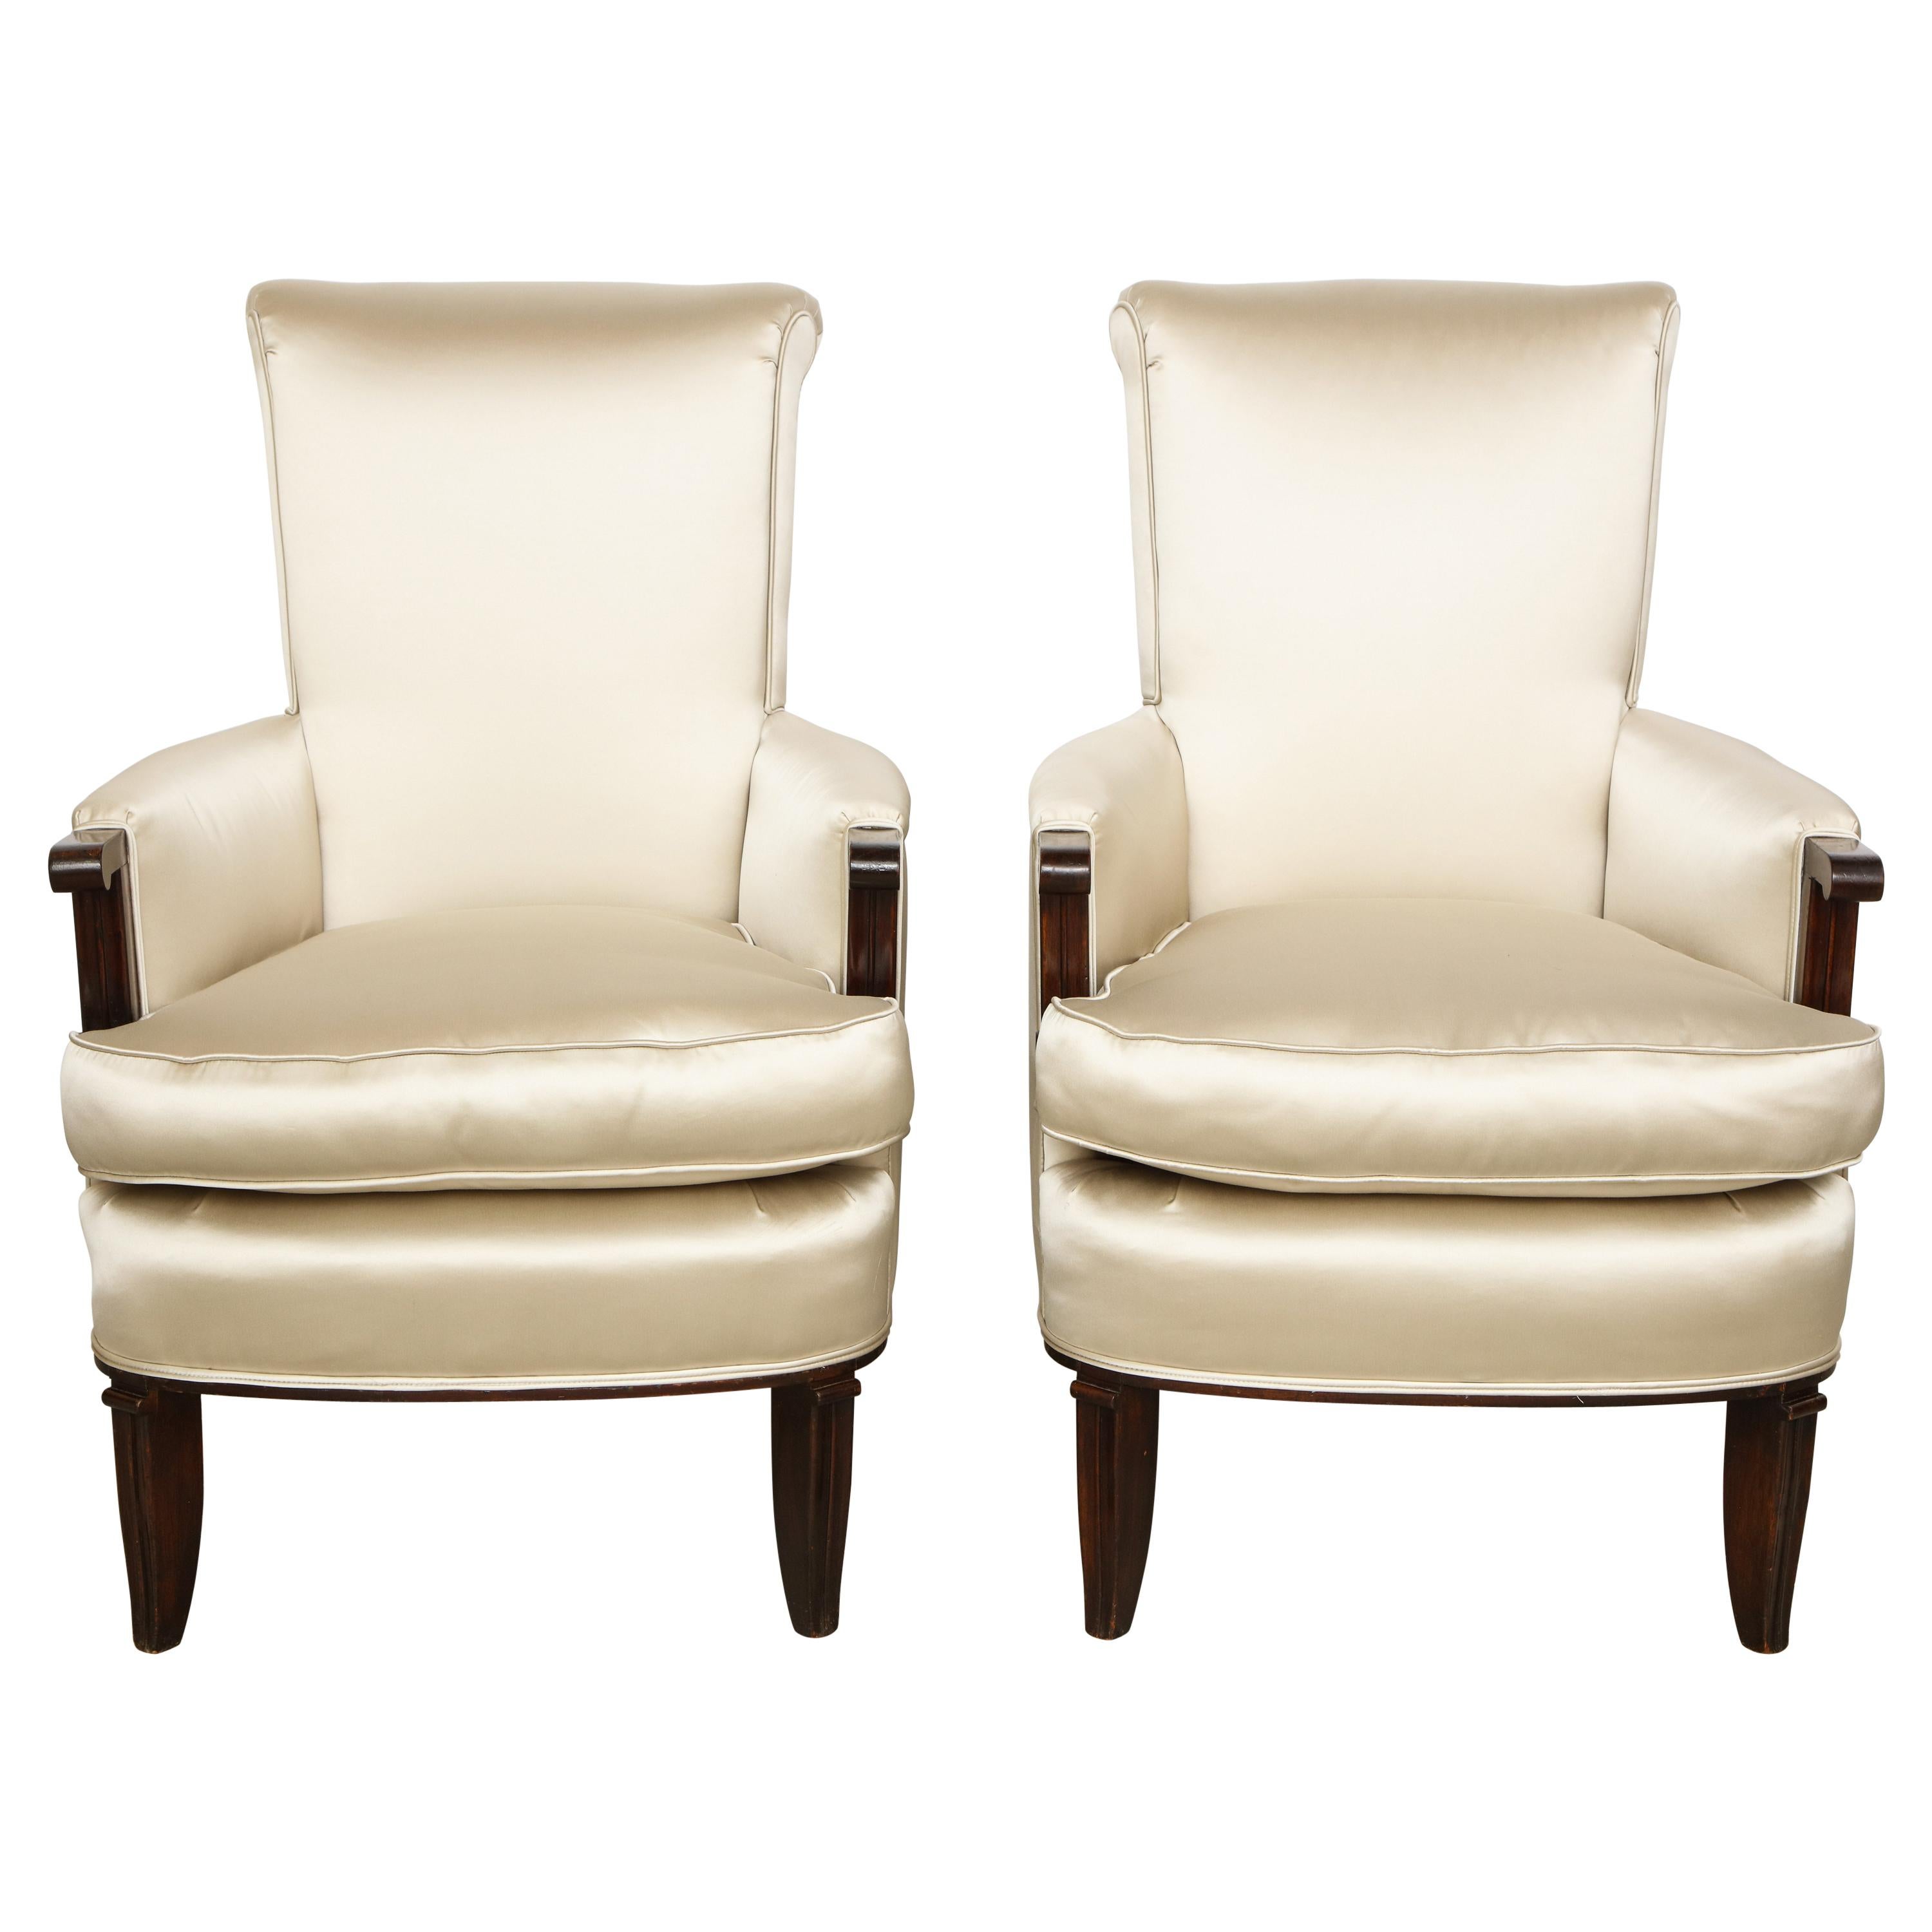 Elegant pair of satin and walnut armchairs by Jules Leleu.
Stamped: 